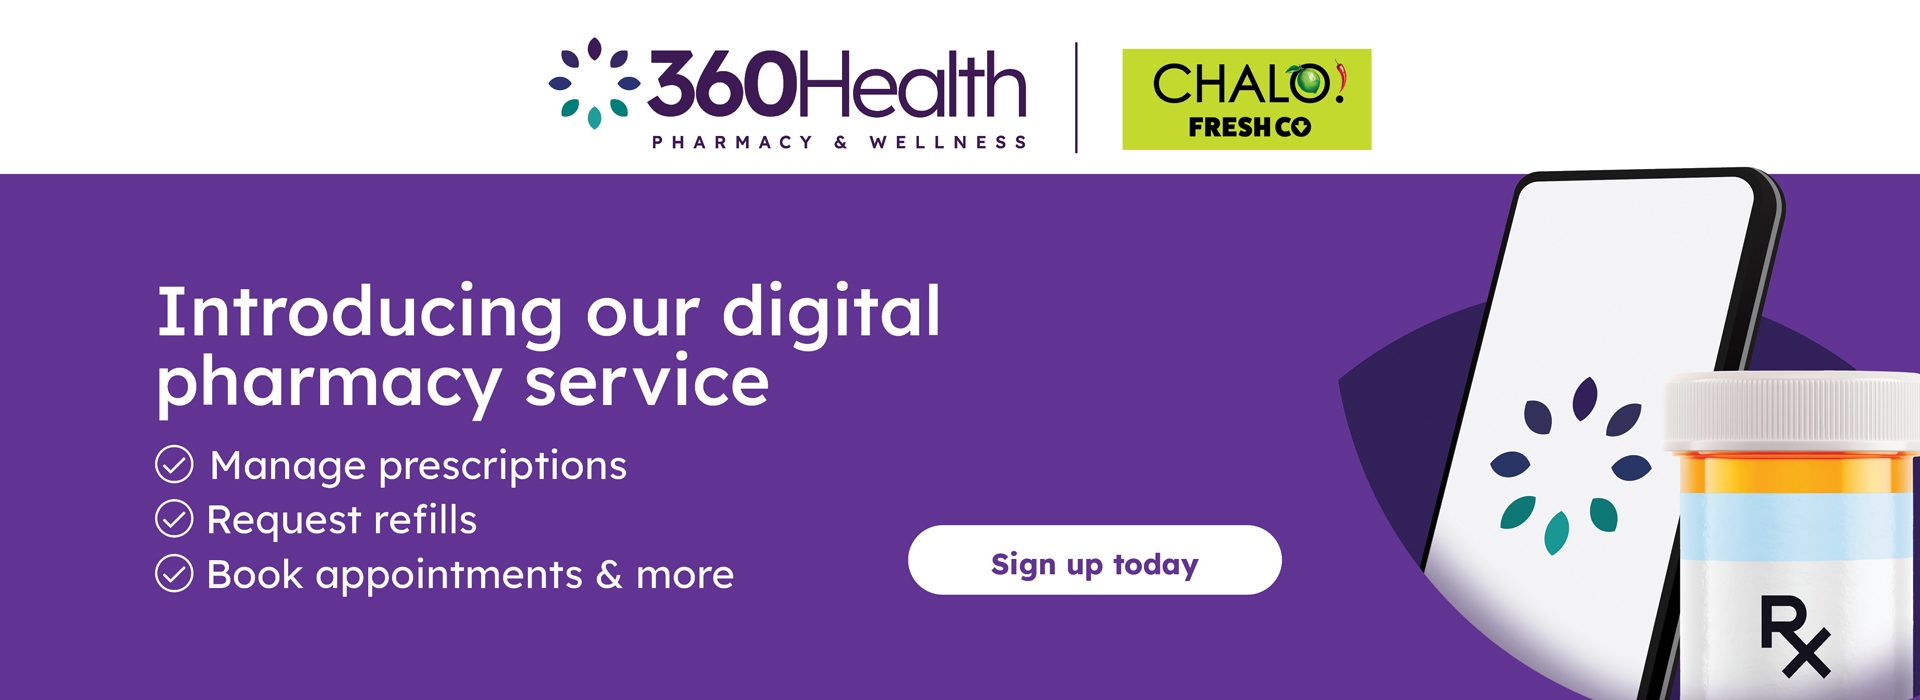 Introducing our new digital pharmacy service